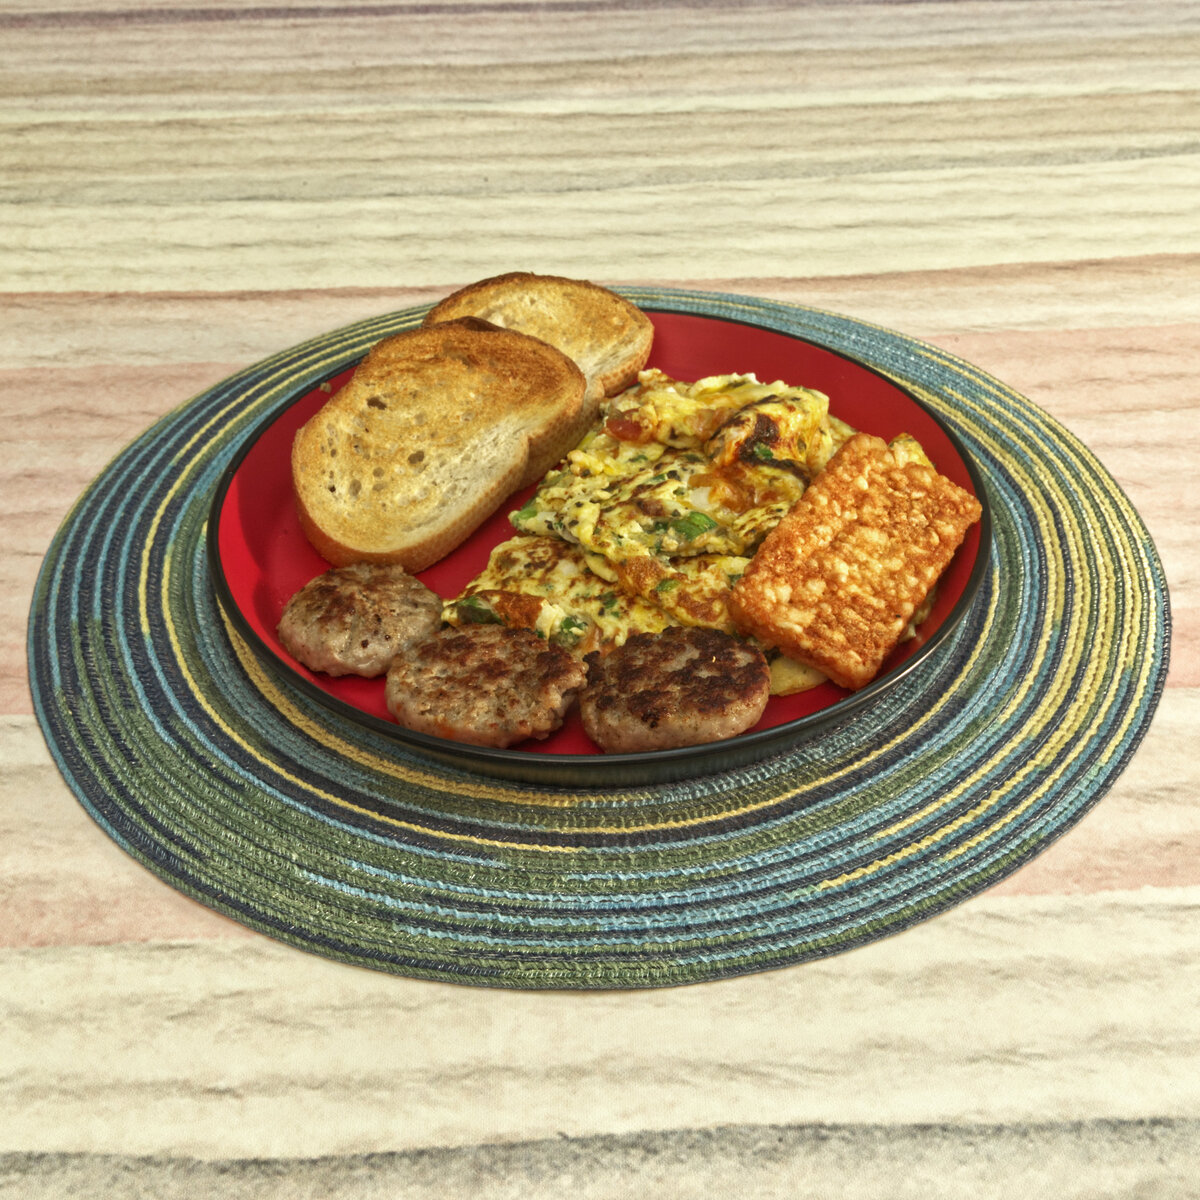 Omelette with Sausage, a Hash Brown Patty and Toast